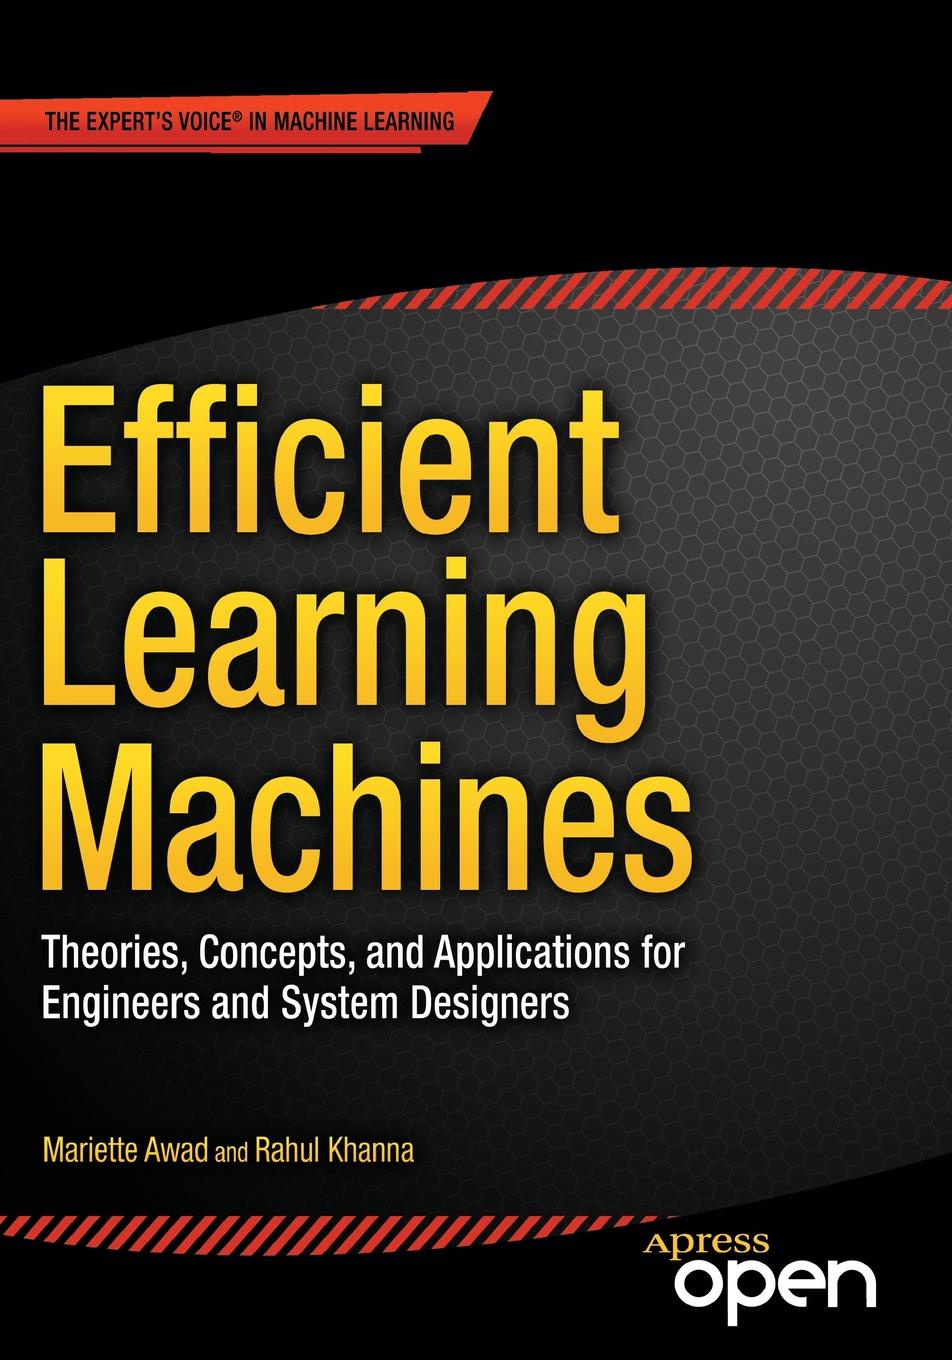 Efficient Learning Machines. Theories, Concepts, and Applications for Engineers and System Designers